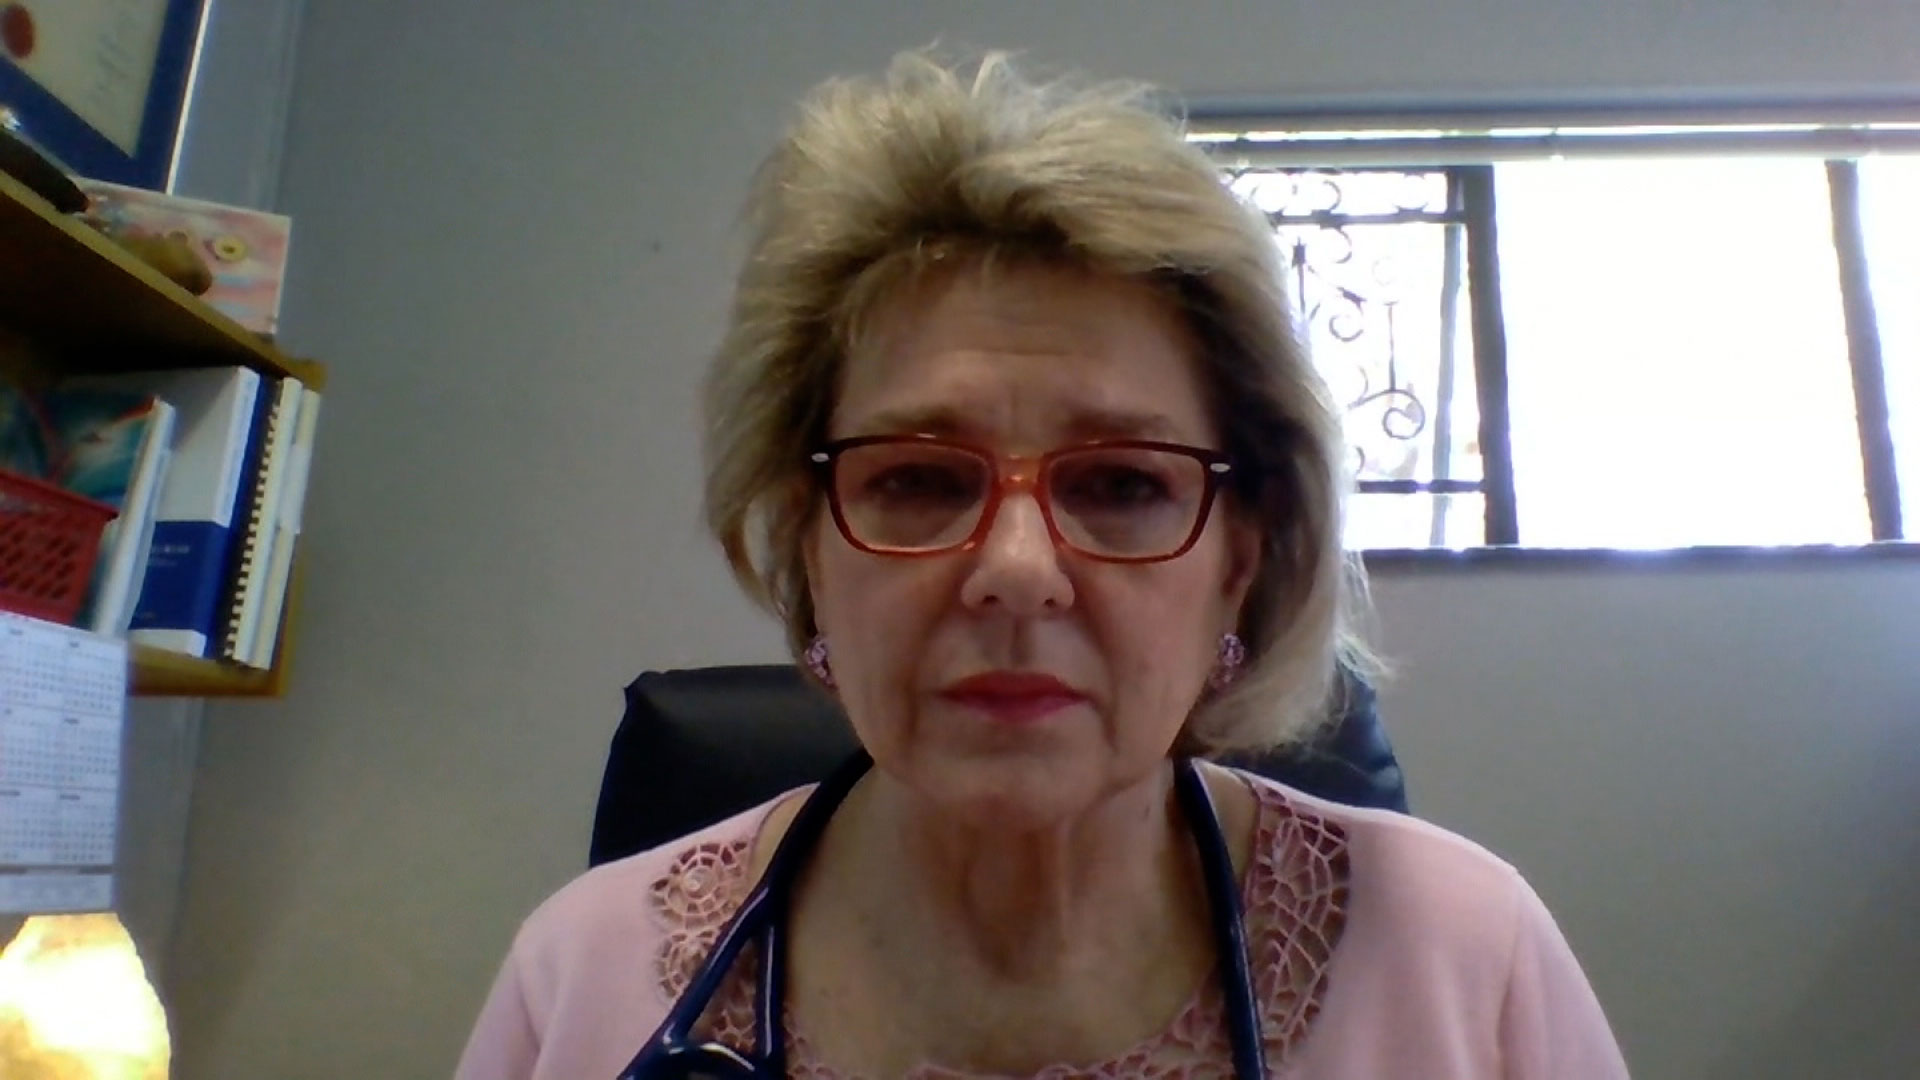 Dr. Angelique Coetzee, chair of the South African Medical Association, on November 30.